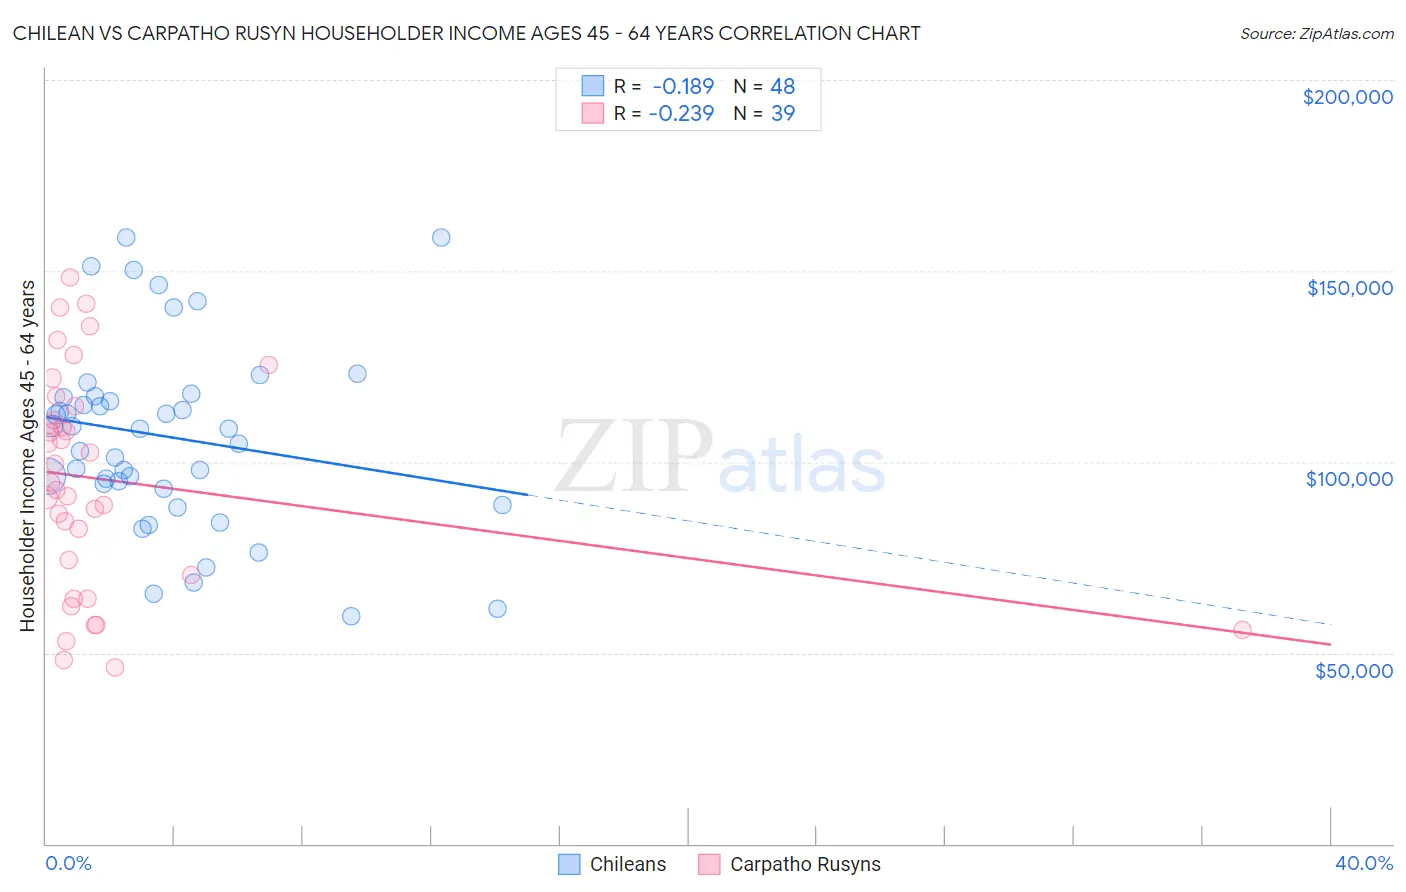 Chilean vs Carpatho Rusyn Householder Income Ages 45 - 64 years